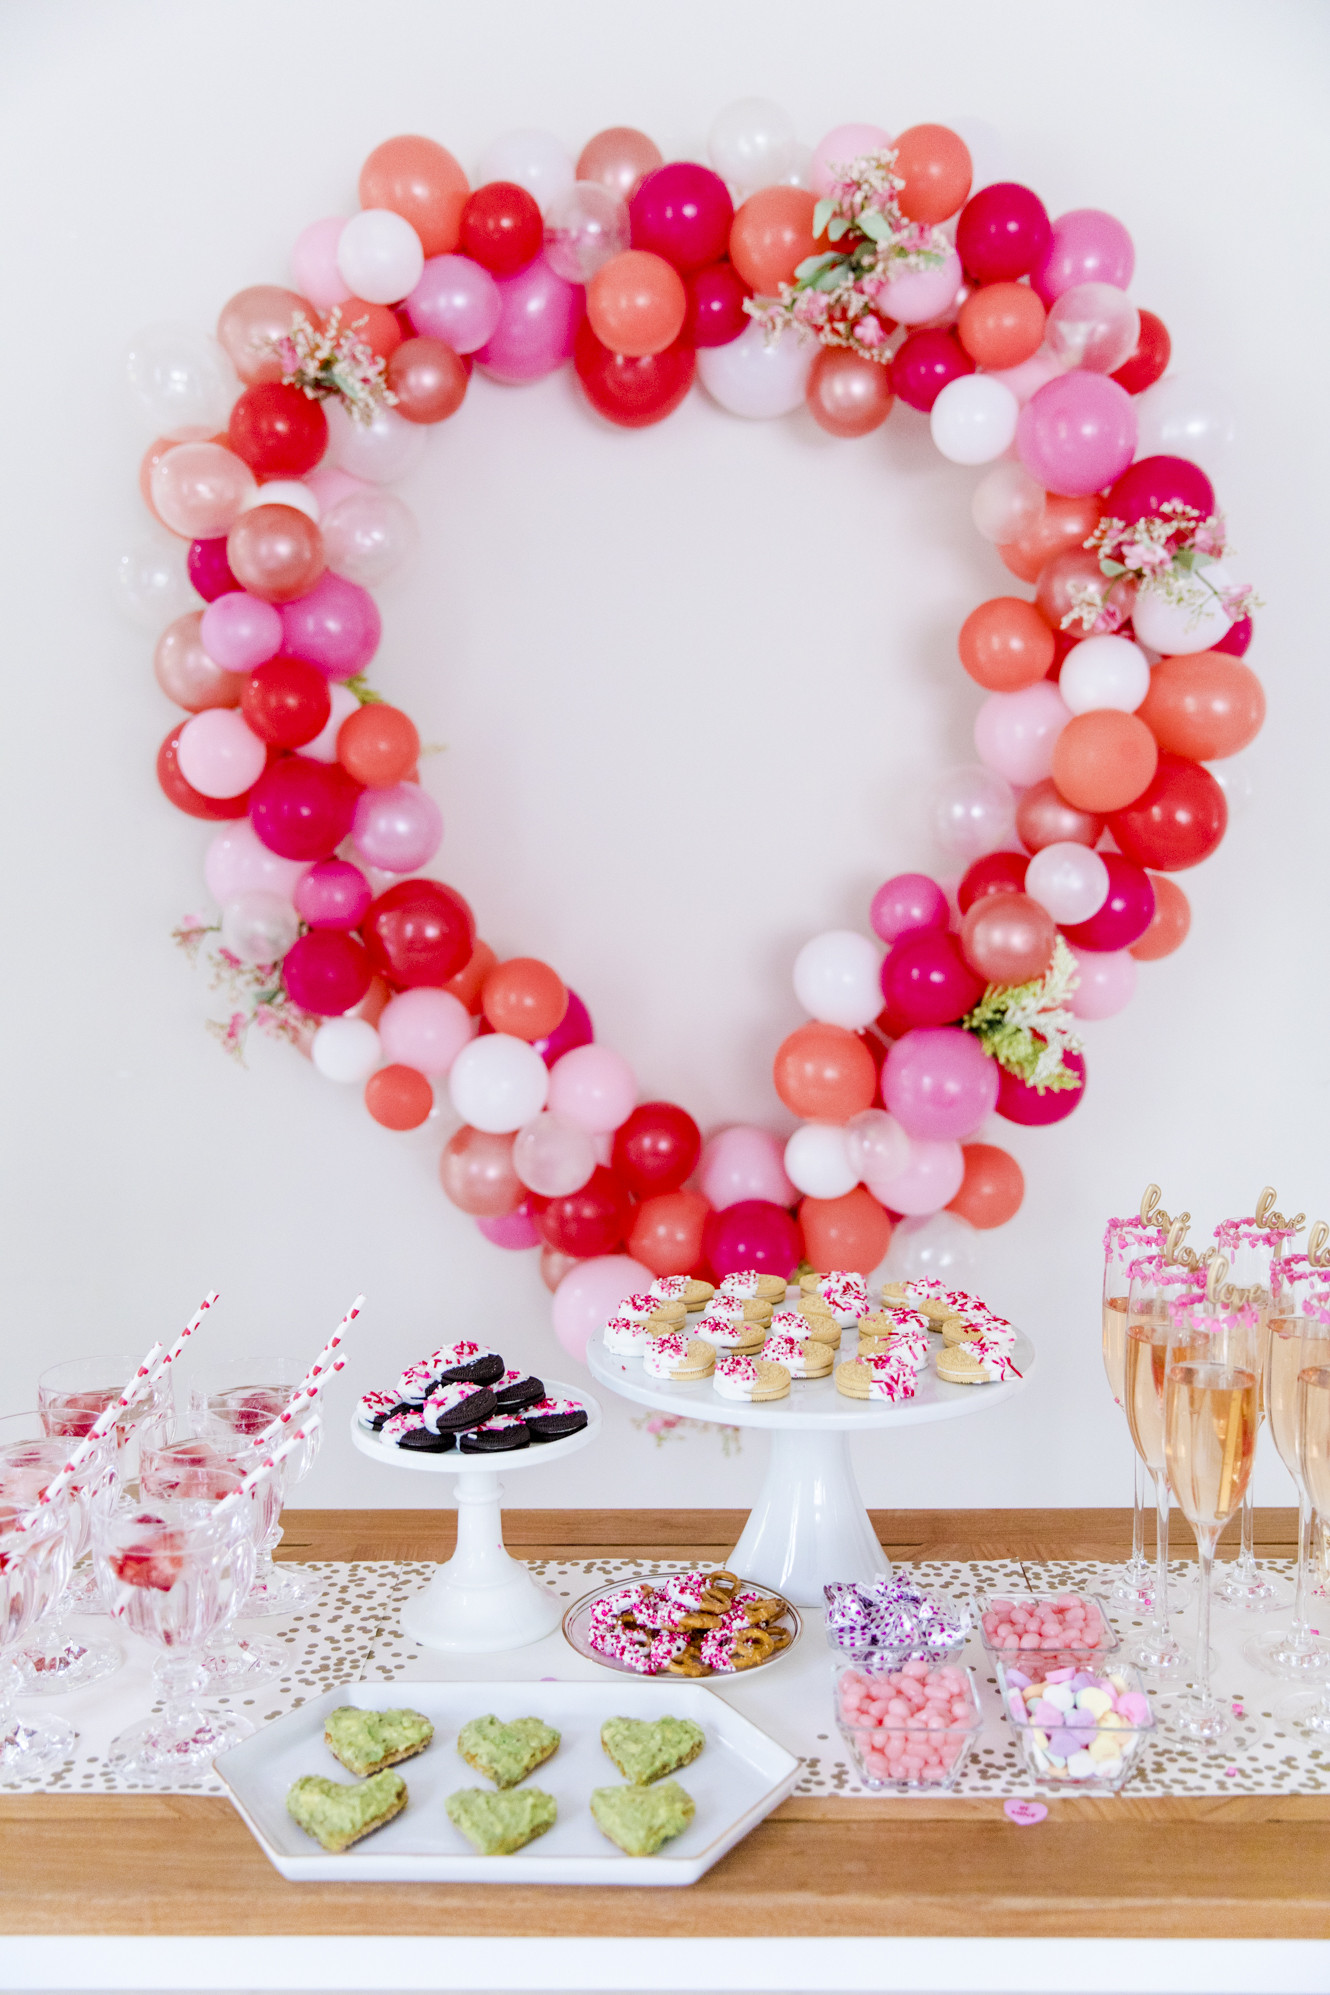 Best Valentines Day Ideas
 Six Ideas for throwing the Best Valentine s Day Party